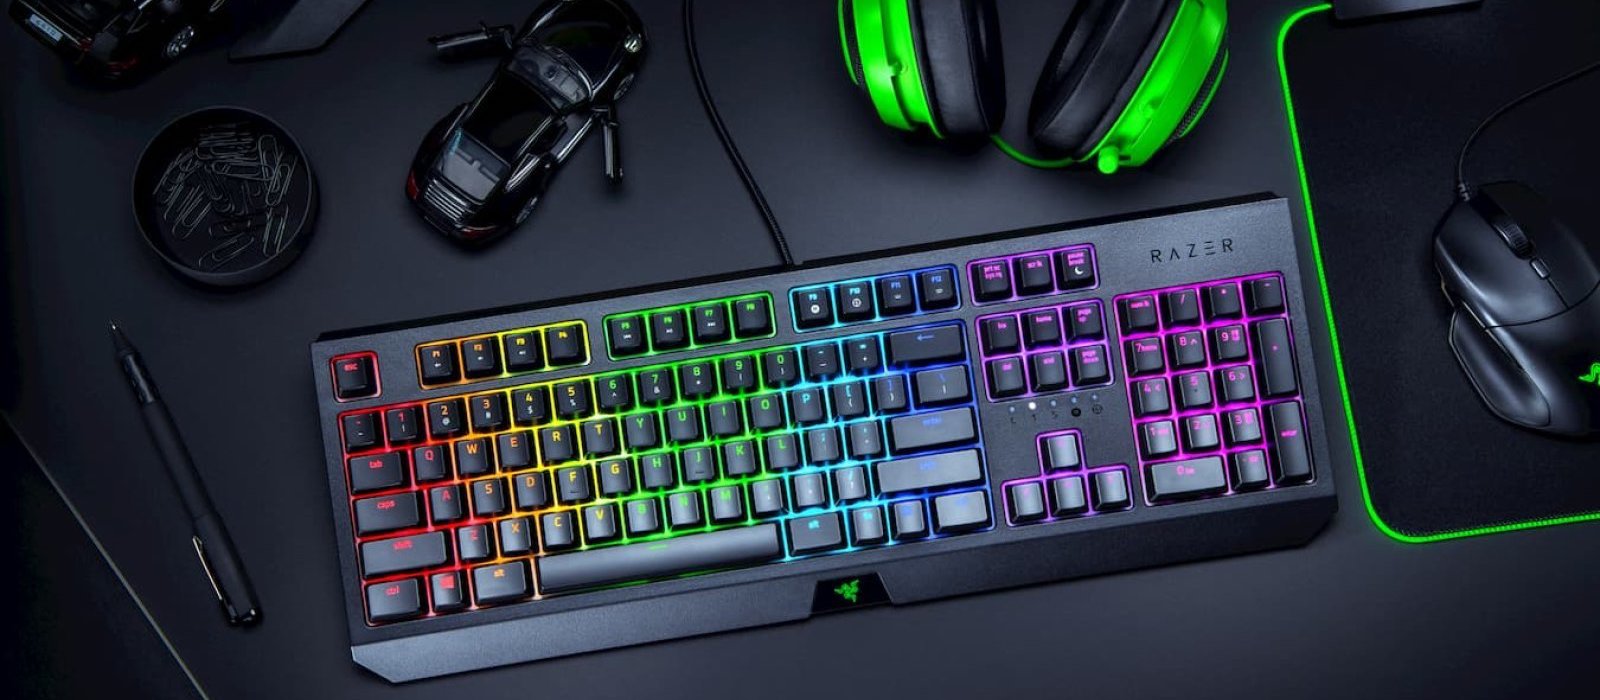 20 Next-level gifts for the gamers in your life